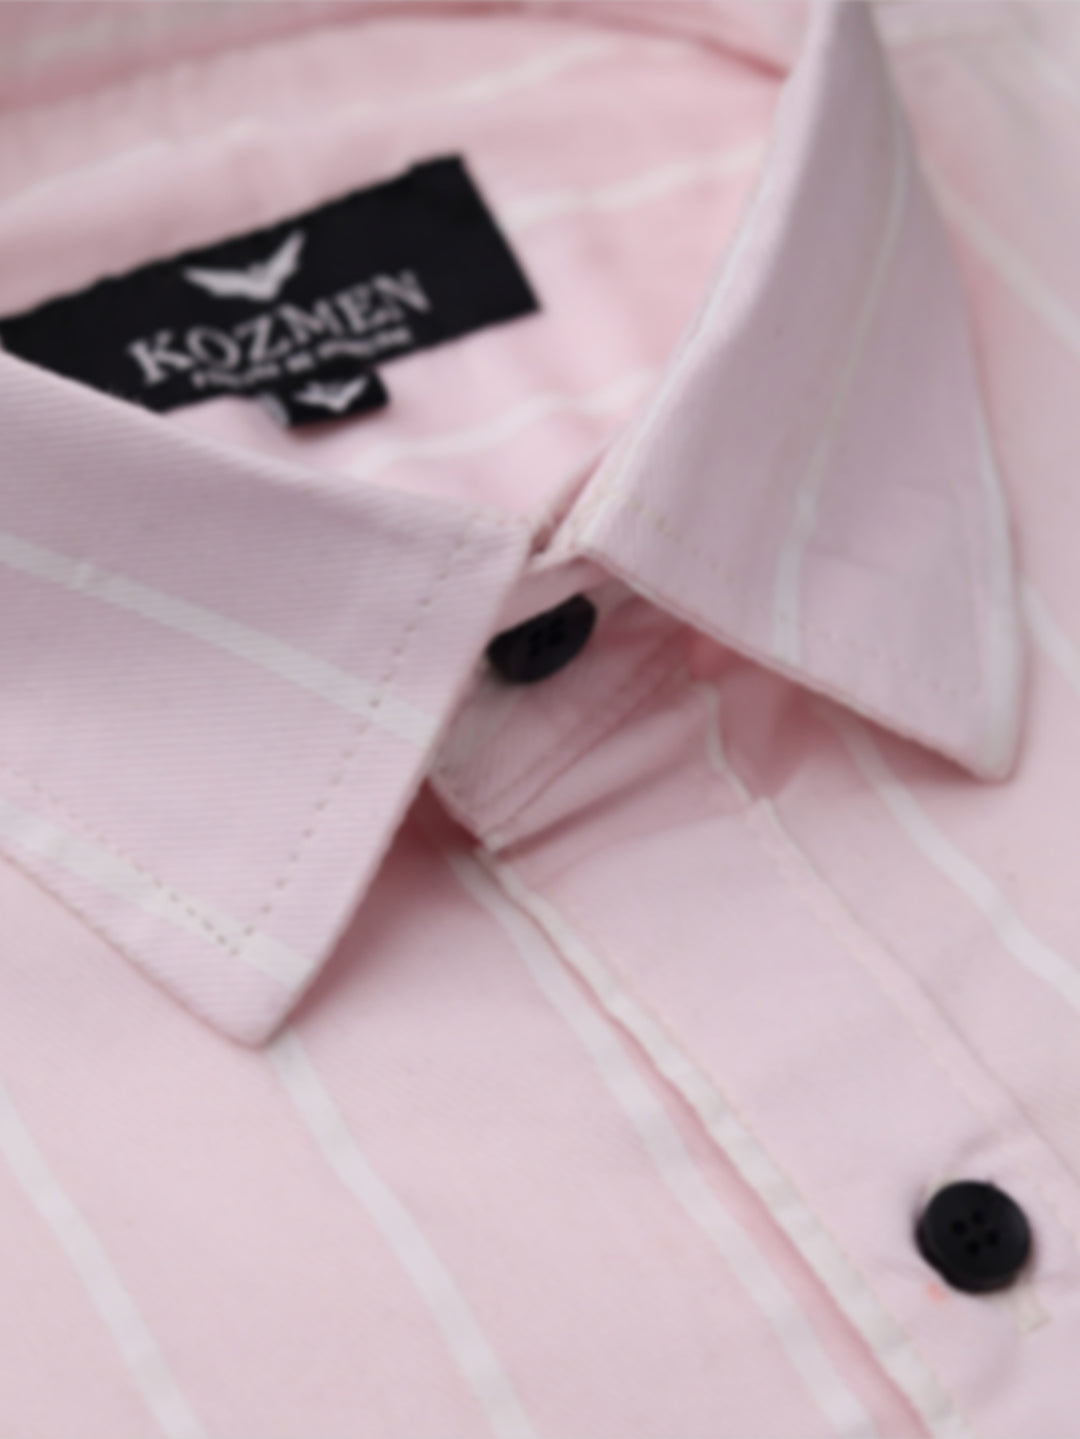 Pink And White Authentic Stripe Casual Shirt